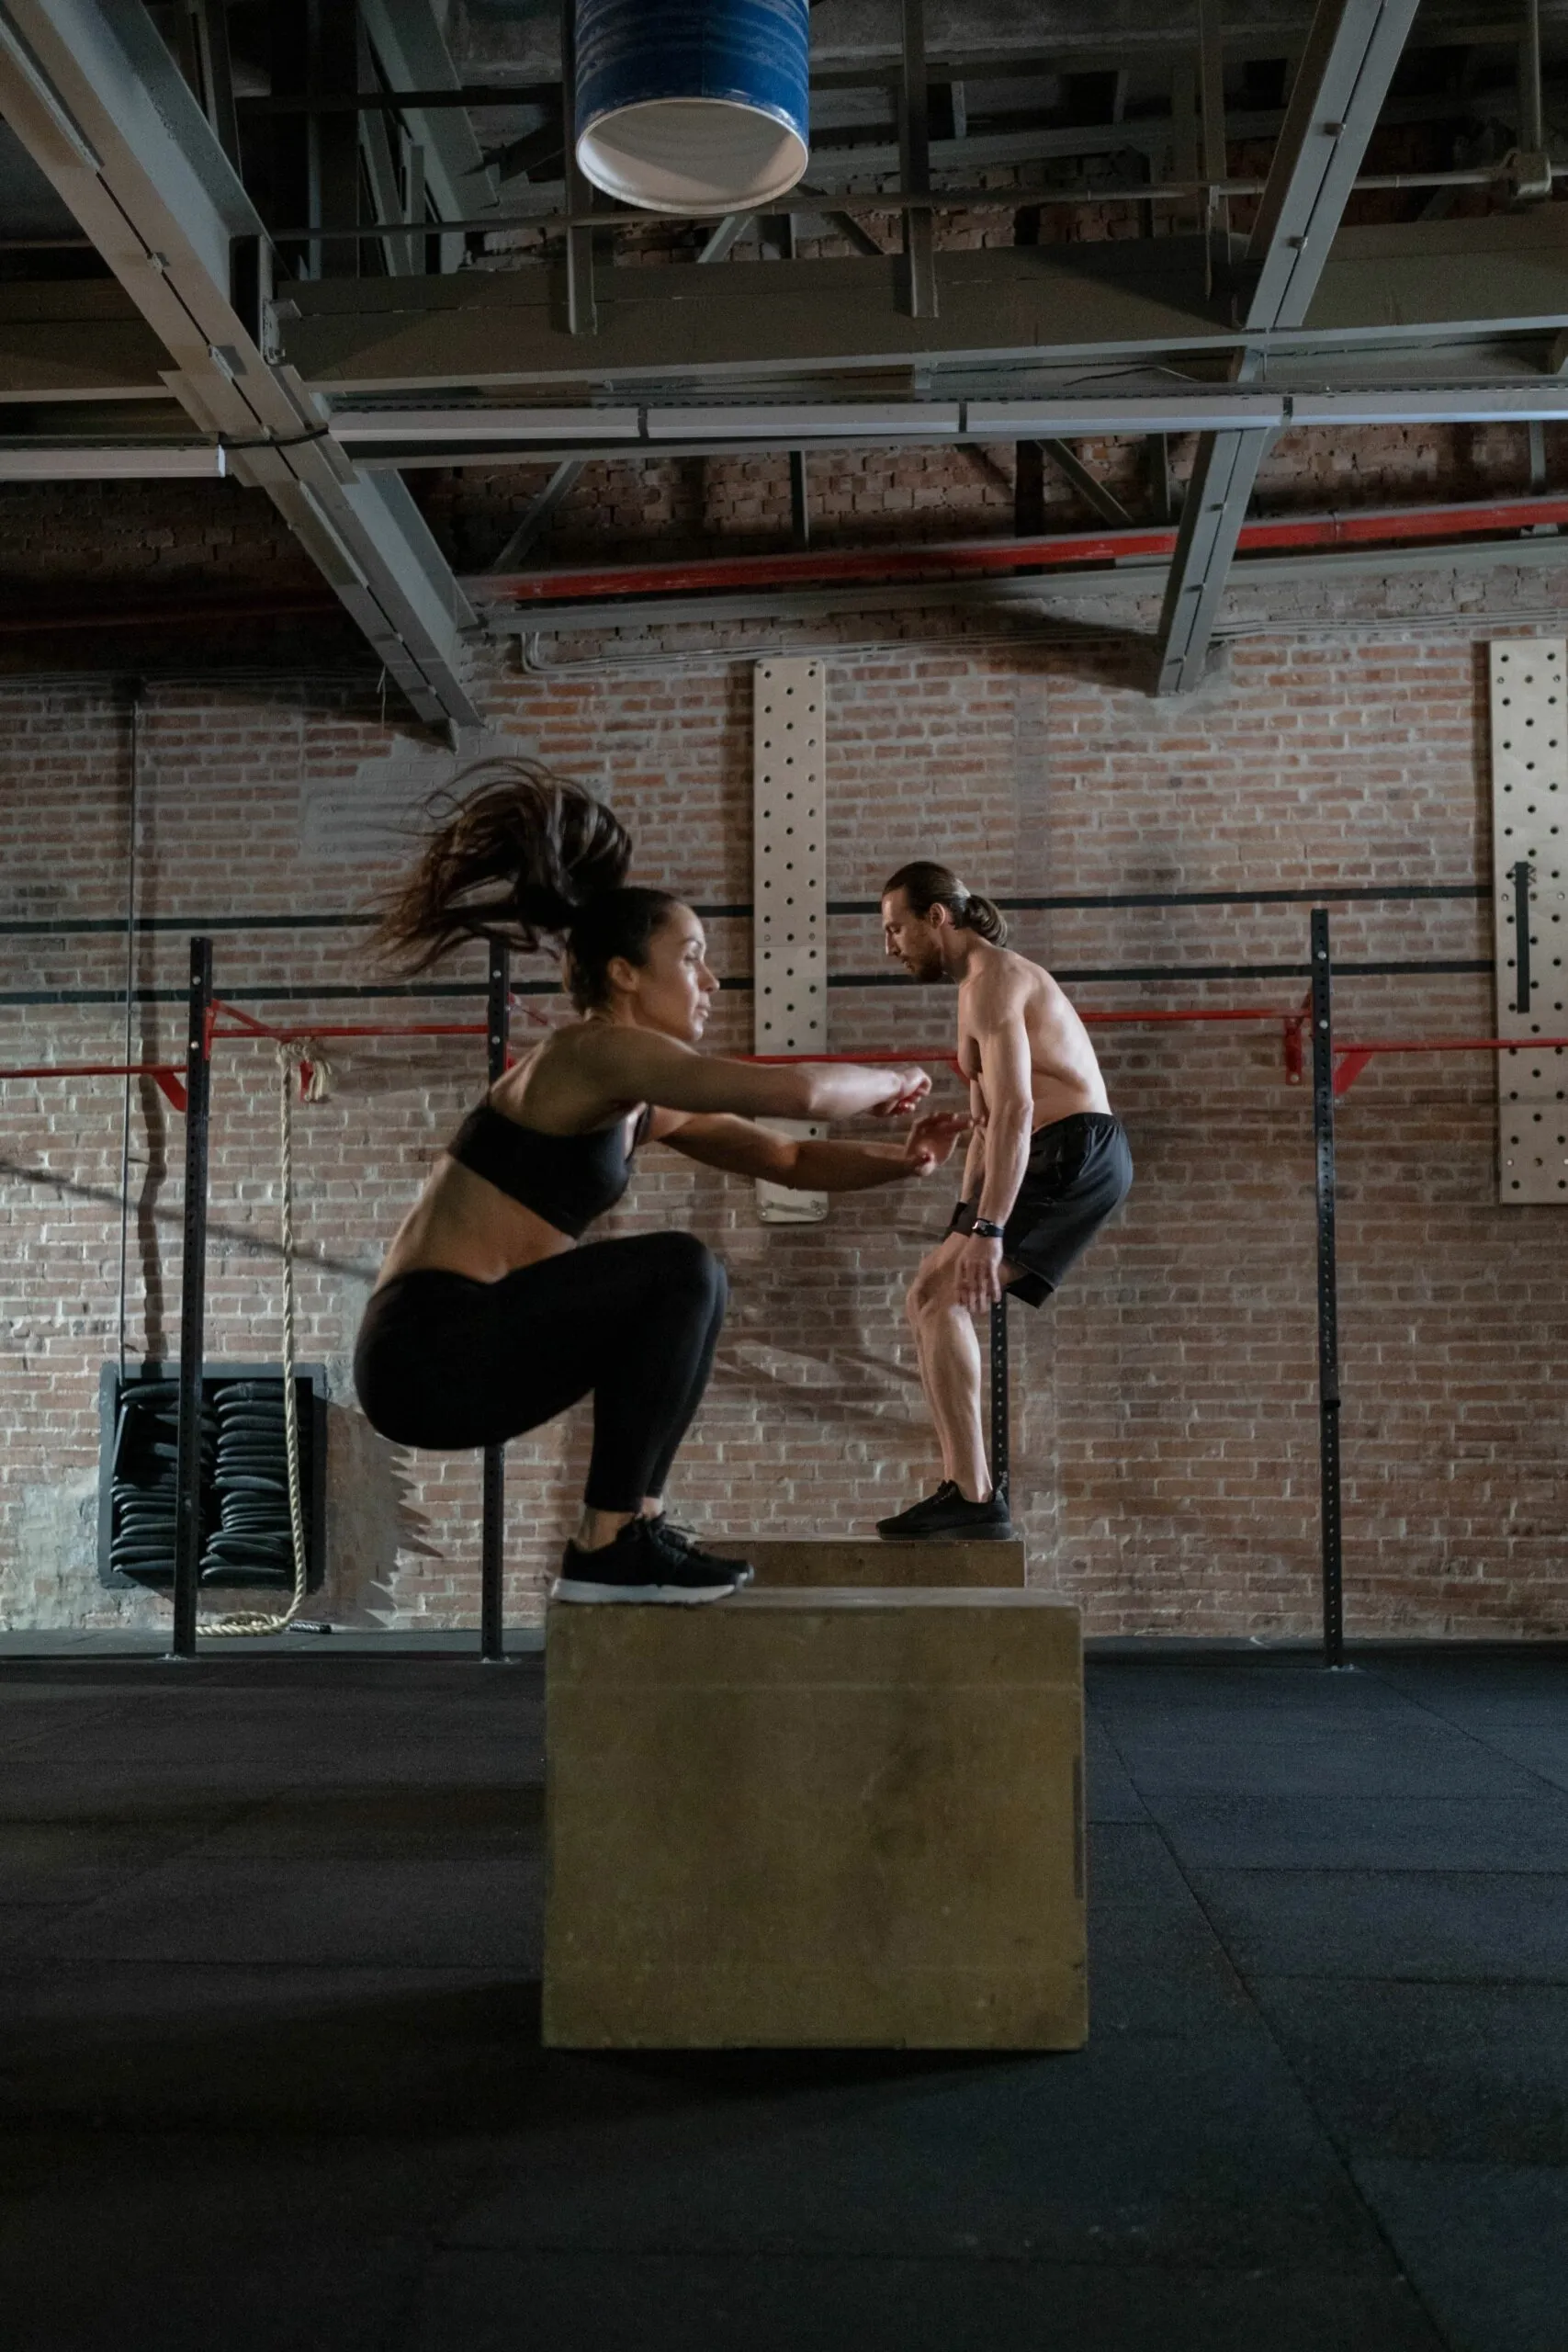 Why Does My Knee Hurt During Crossfit?